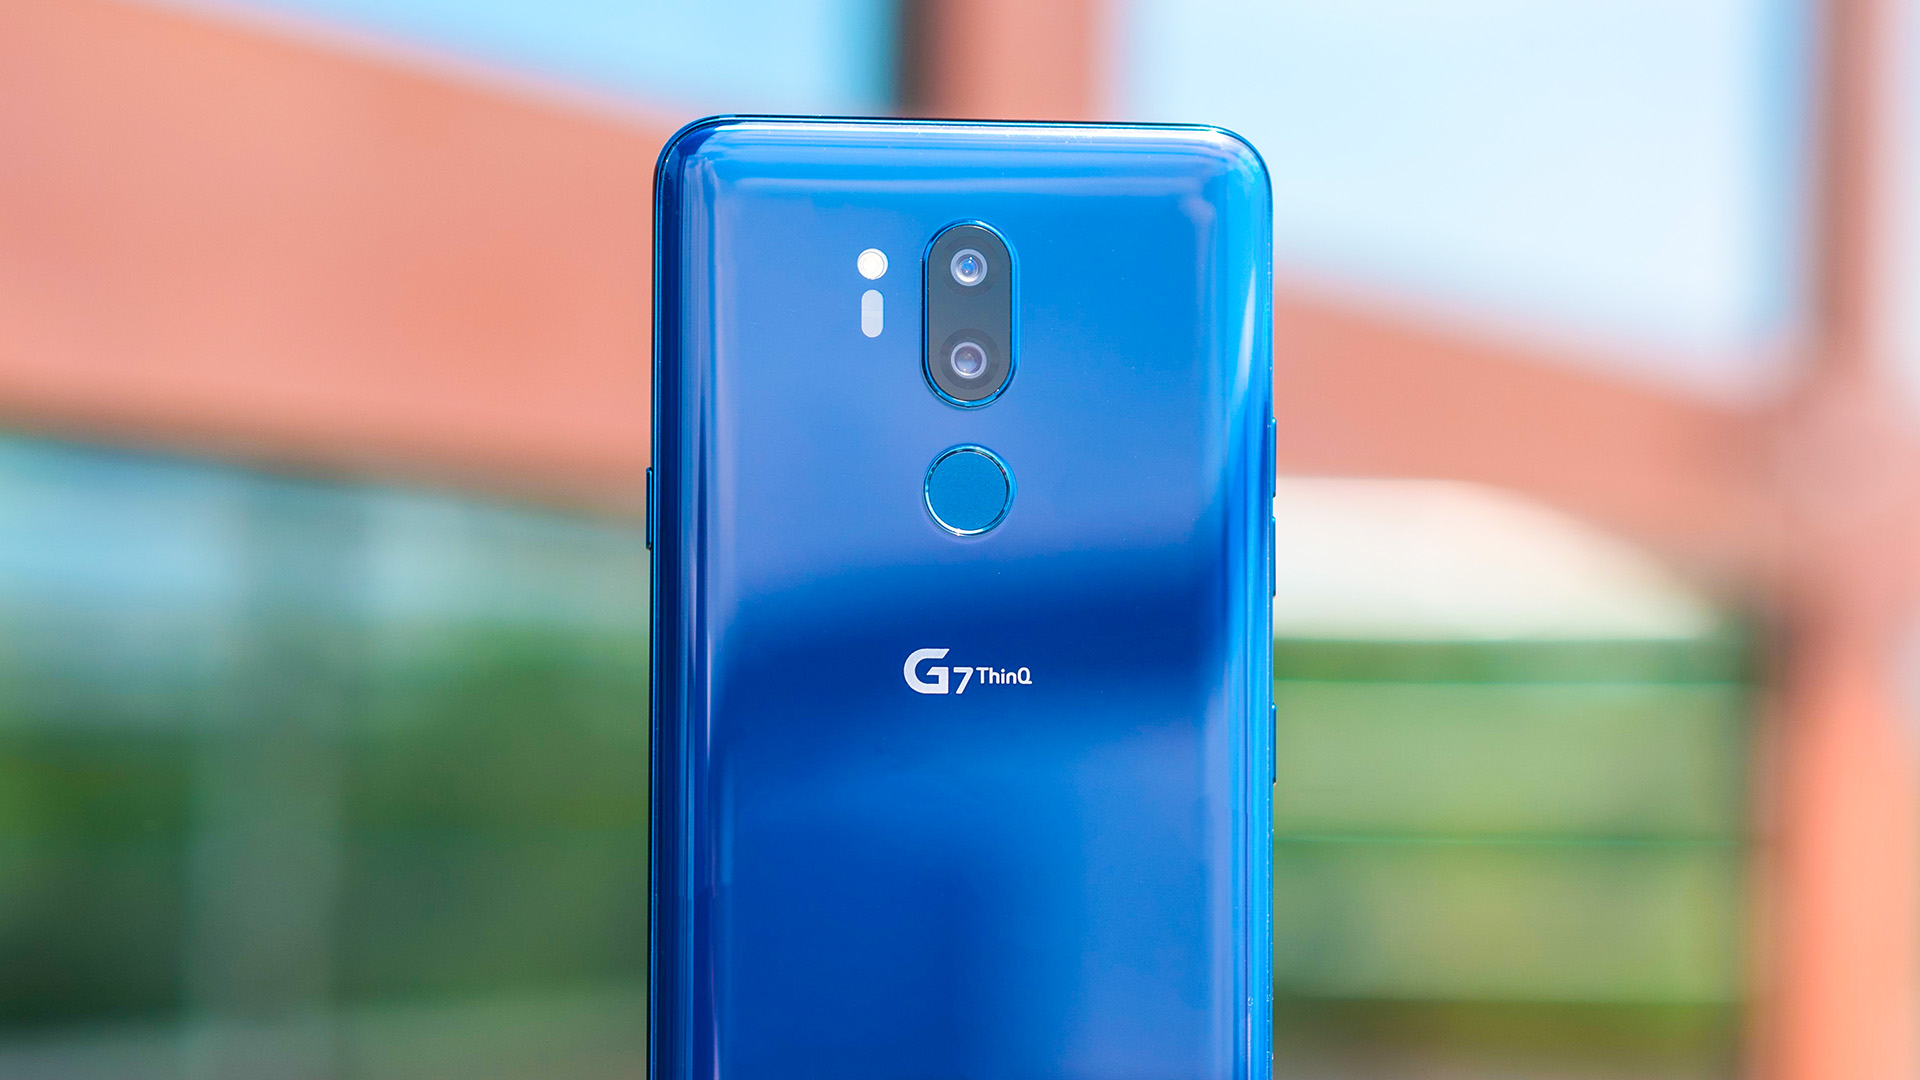 LG G7 ThinQ recently gets VoWiFi with the new update